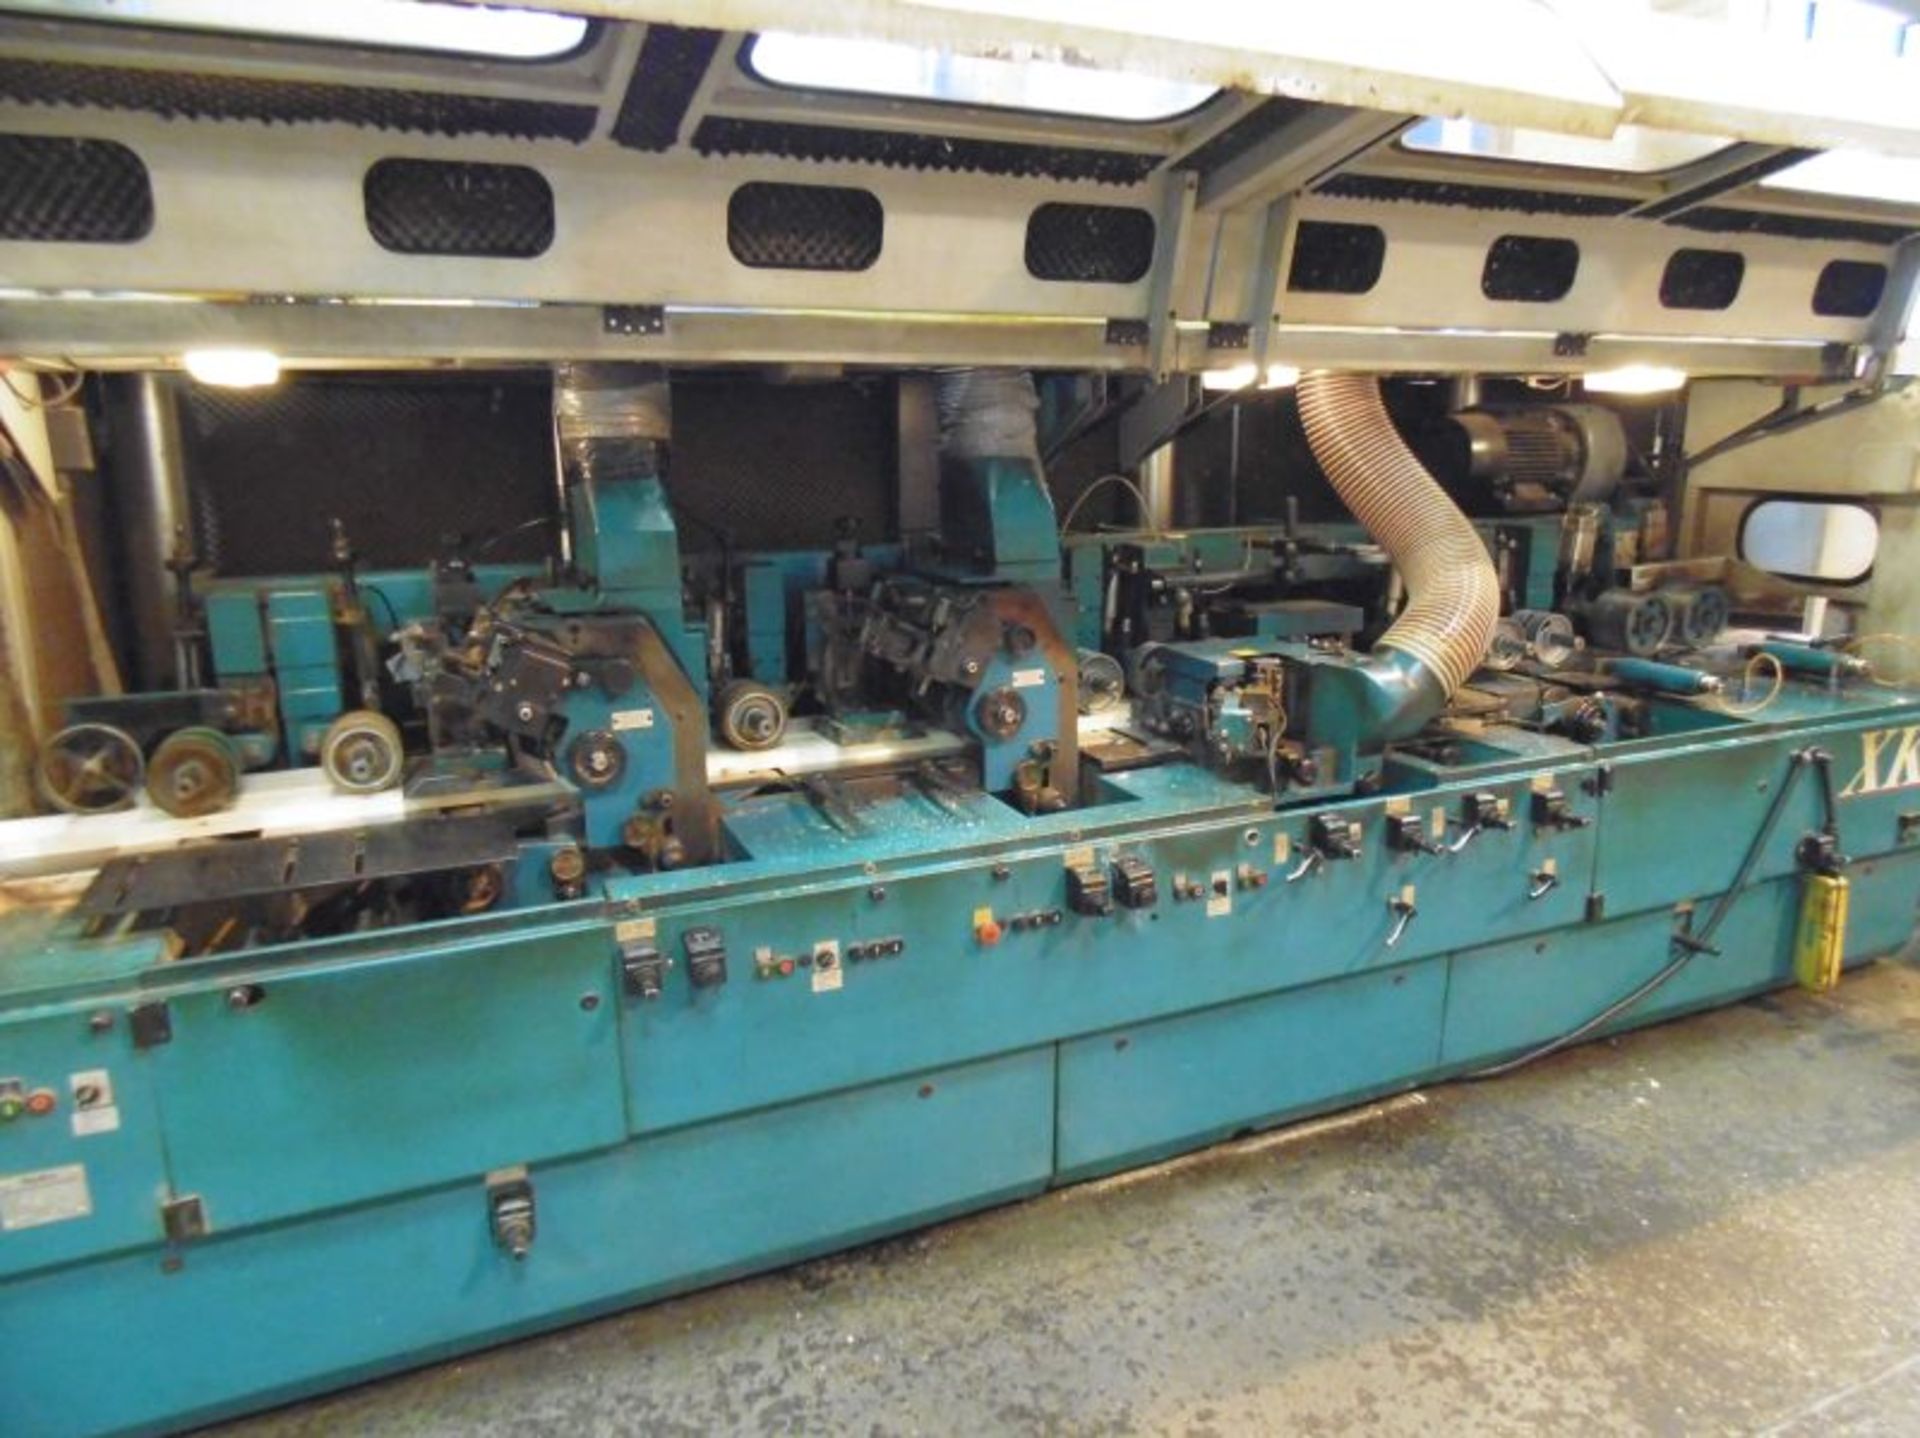 * Wadkin 6 Headed Through Feed Four Sided Planer/Moulder with full sound enclosure. Year 2000. Model - Image 3 of 20